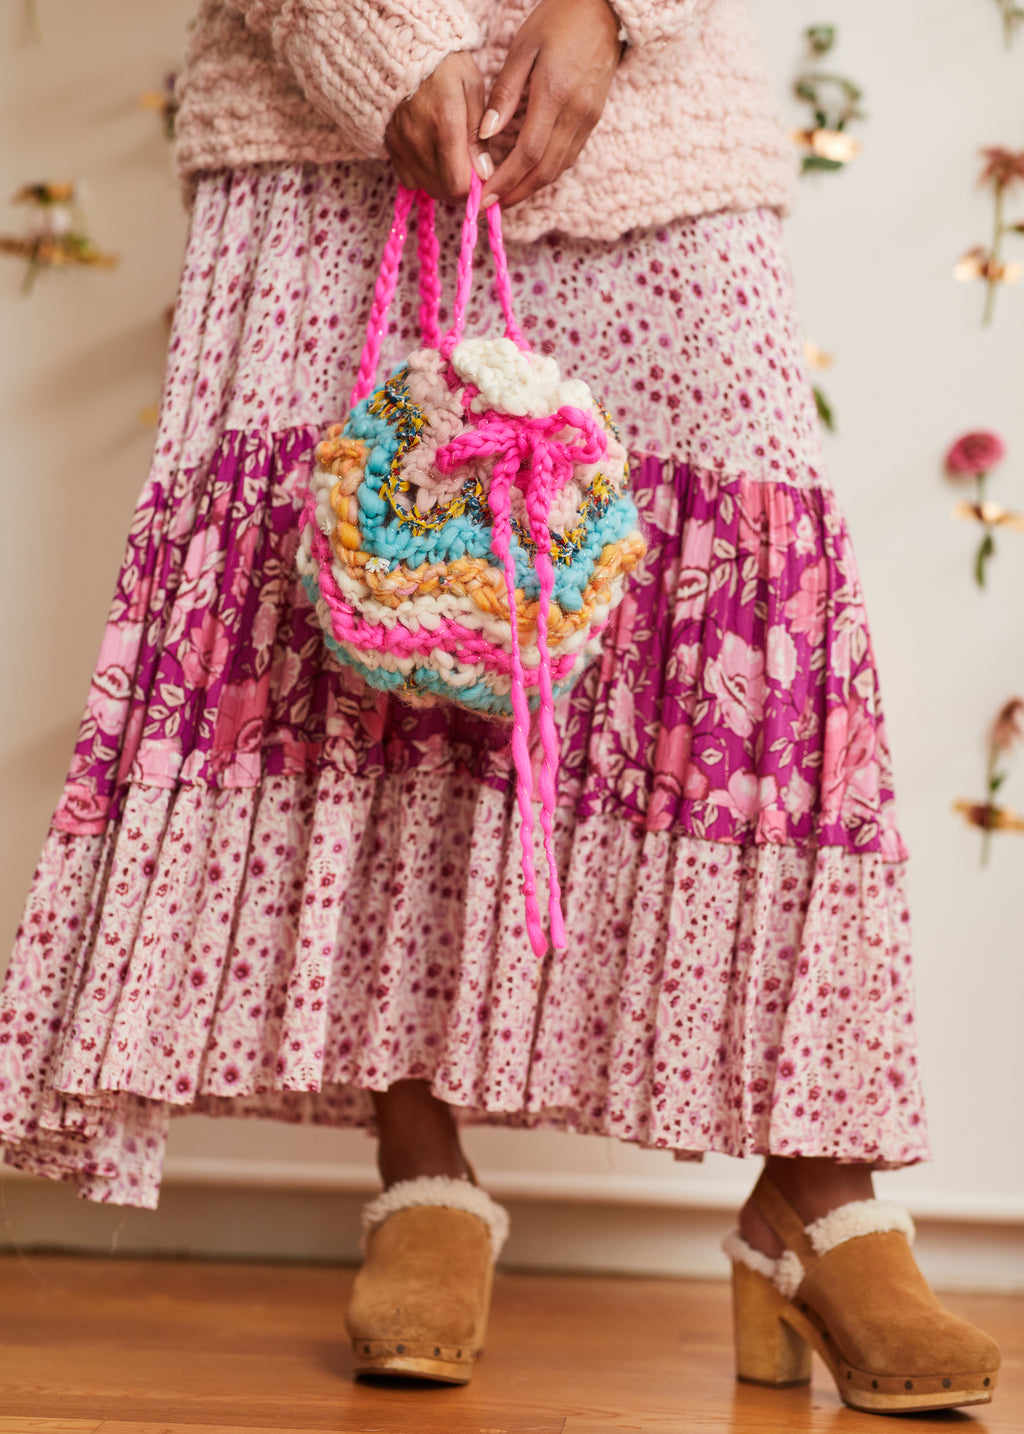 The Sunshine Sack pattern combines both knitting and crochet in with our handmade yarns